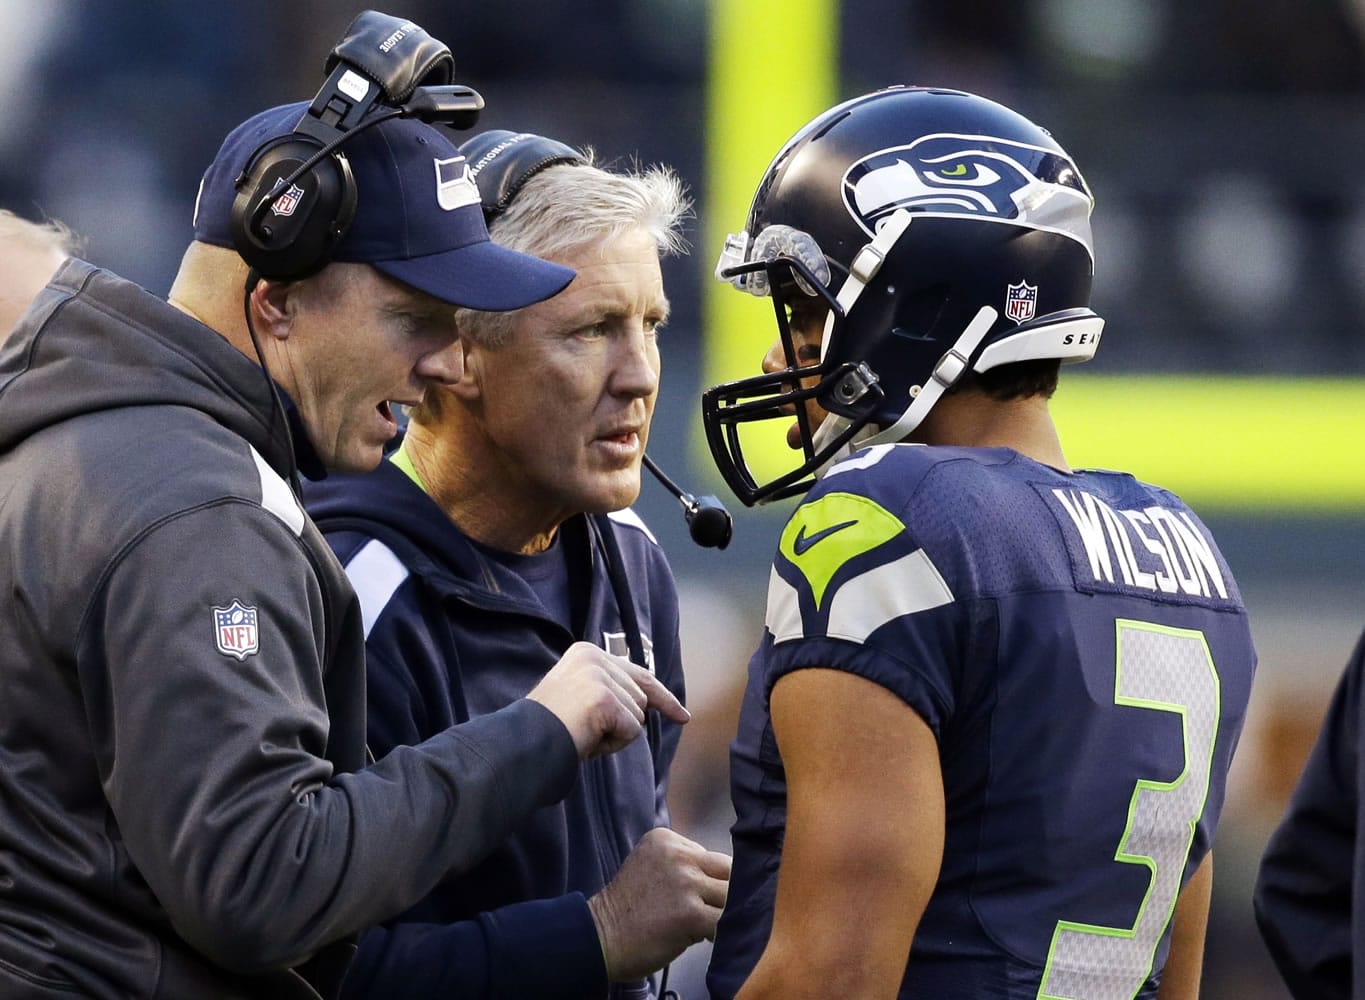 Seattle Seahawks quarterback Russell Wilson (3) talks with head coach Pete Carroll, center, and offensive coordinator Darrell Bevell before Wilson's final play against the Tampa Bay Buccaneers in overtime in an NFL football game Sunday, Nov. 3, 2013, in Seattle. The Seahawks won 27-24 on a field goal in overtime.